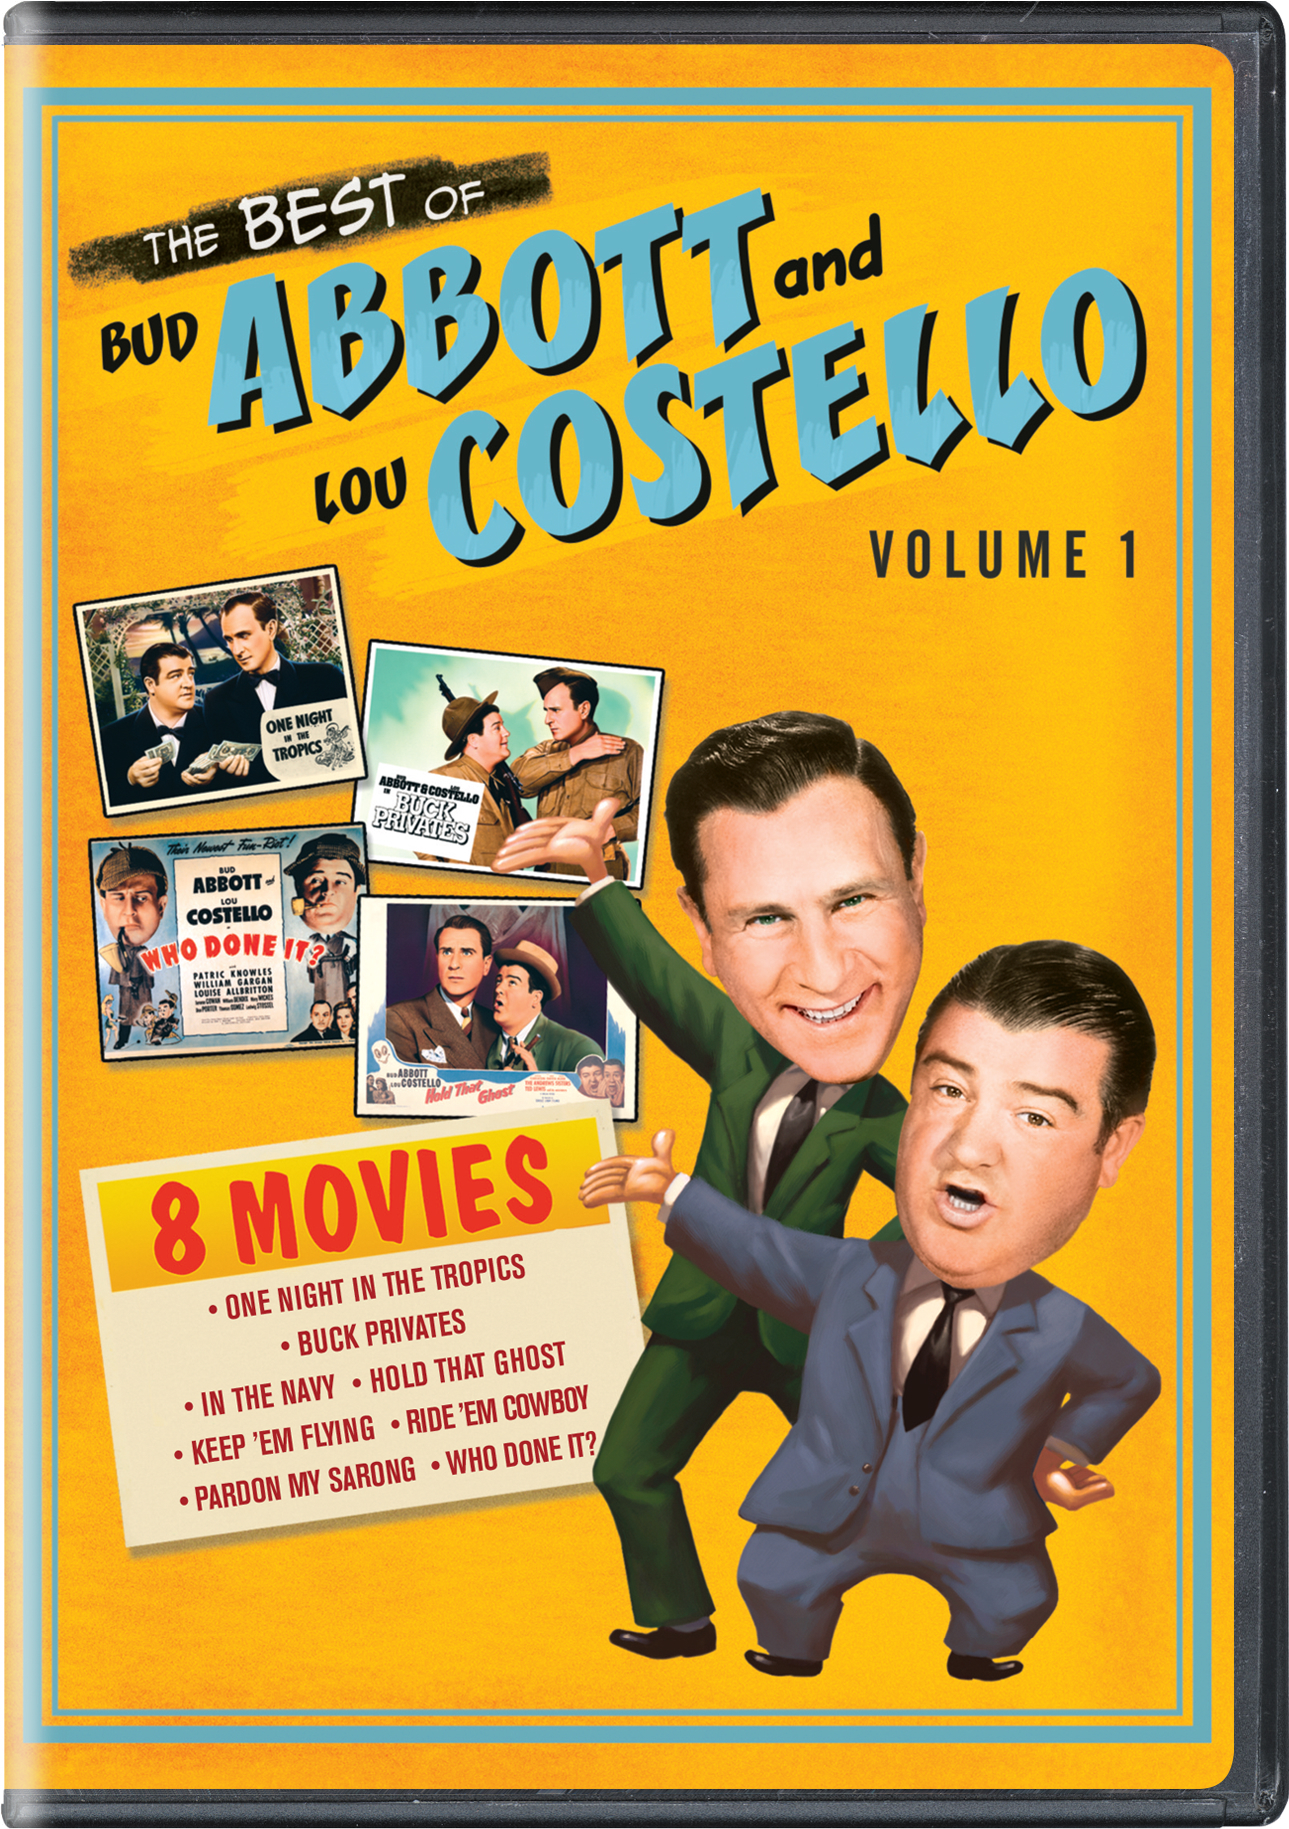 The Best Of Bud Abbott And Lou Costello: Volume 1 - DVD   - Comedy Movies On DVD - Movies On GRUV